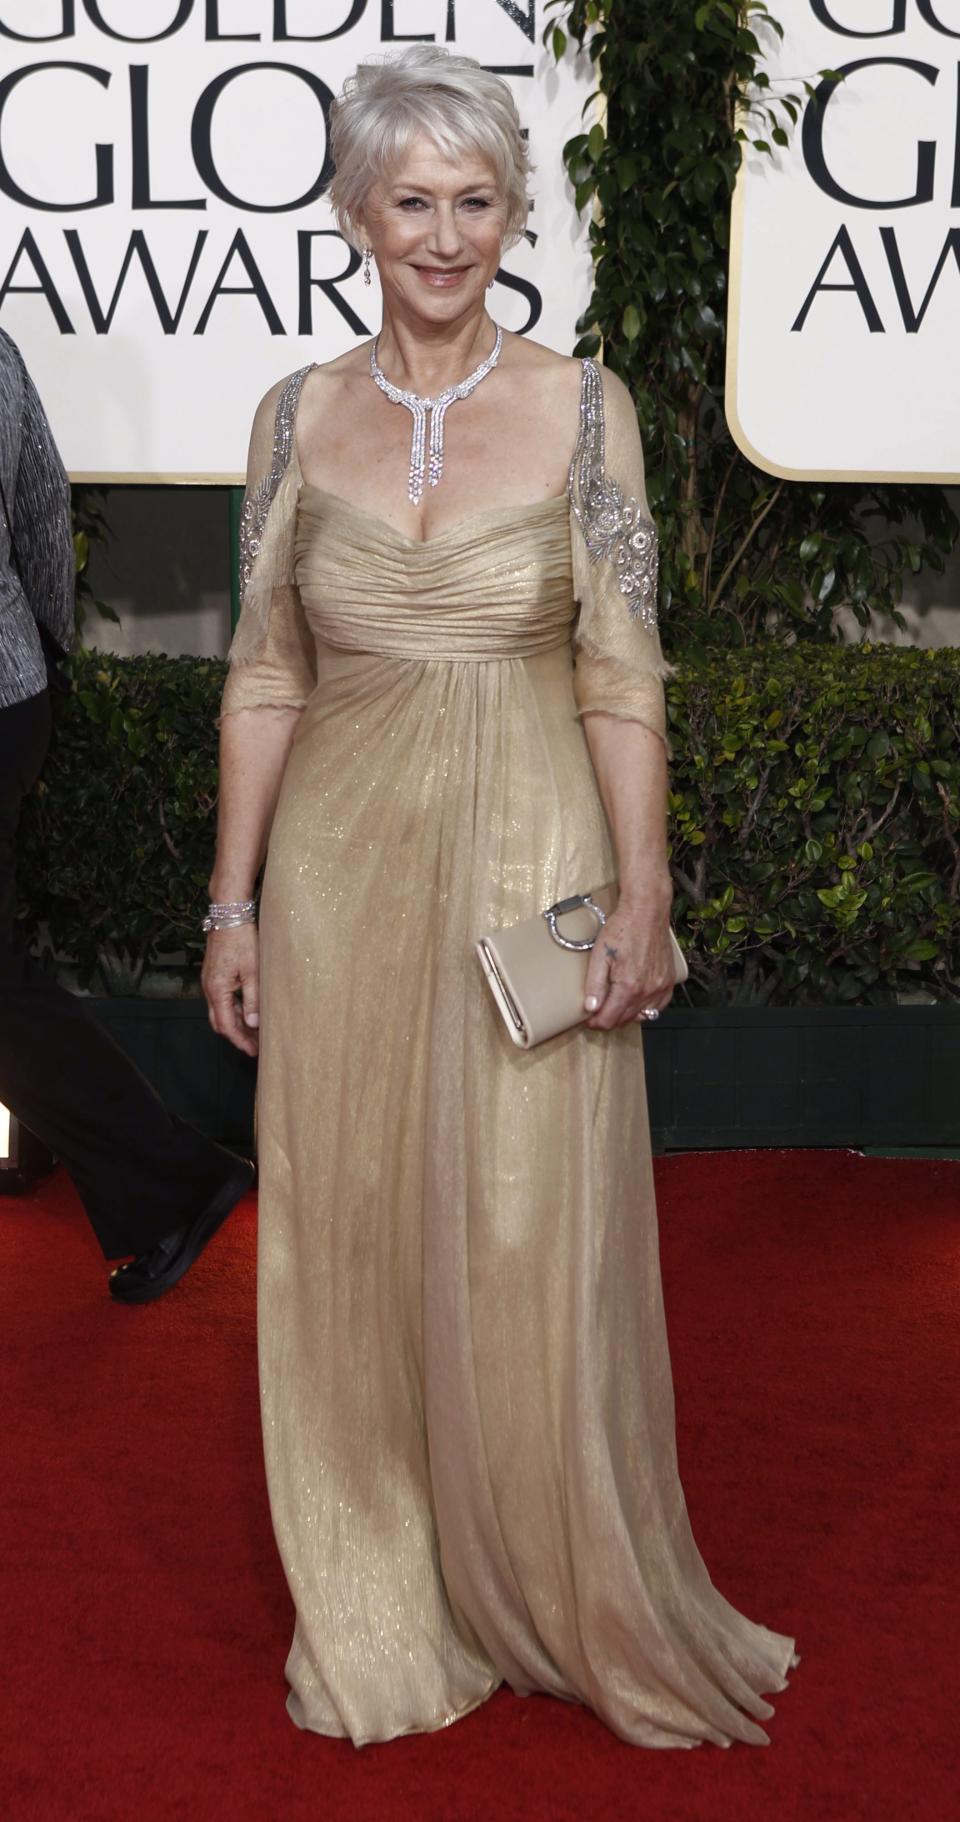 Helen Mirren poses in a gold Badgley Mischka Couture gown to the 2011 Golden Globe Awards. (Image via Getty Images)